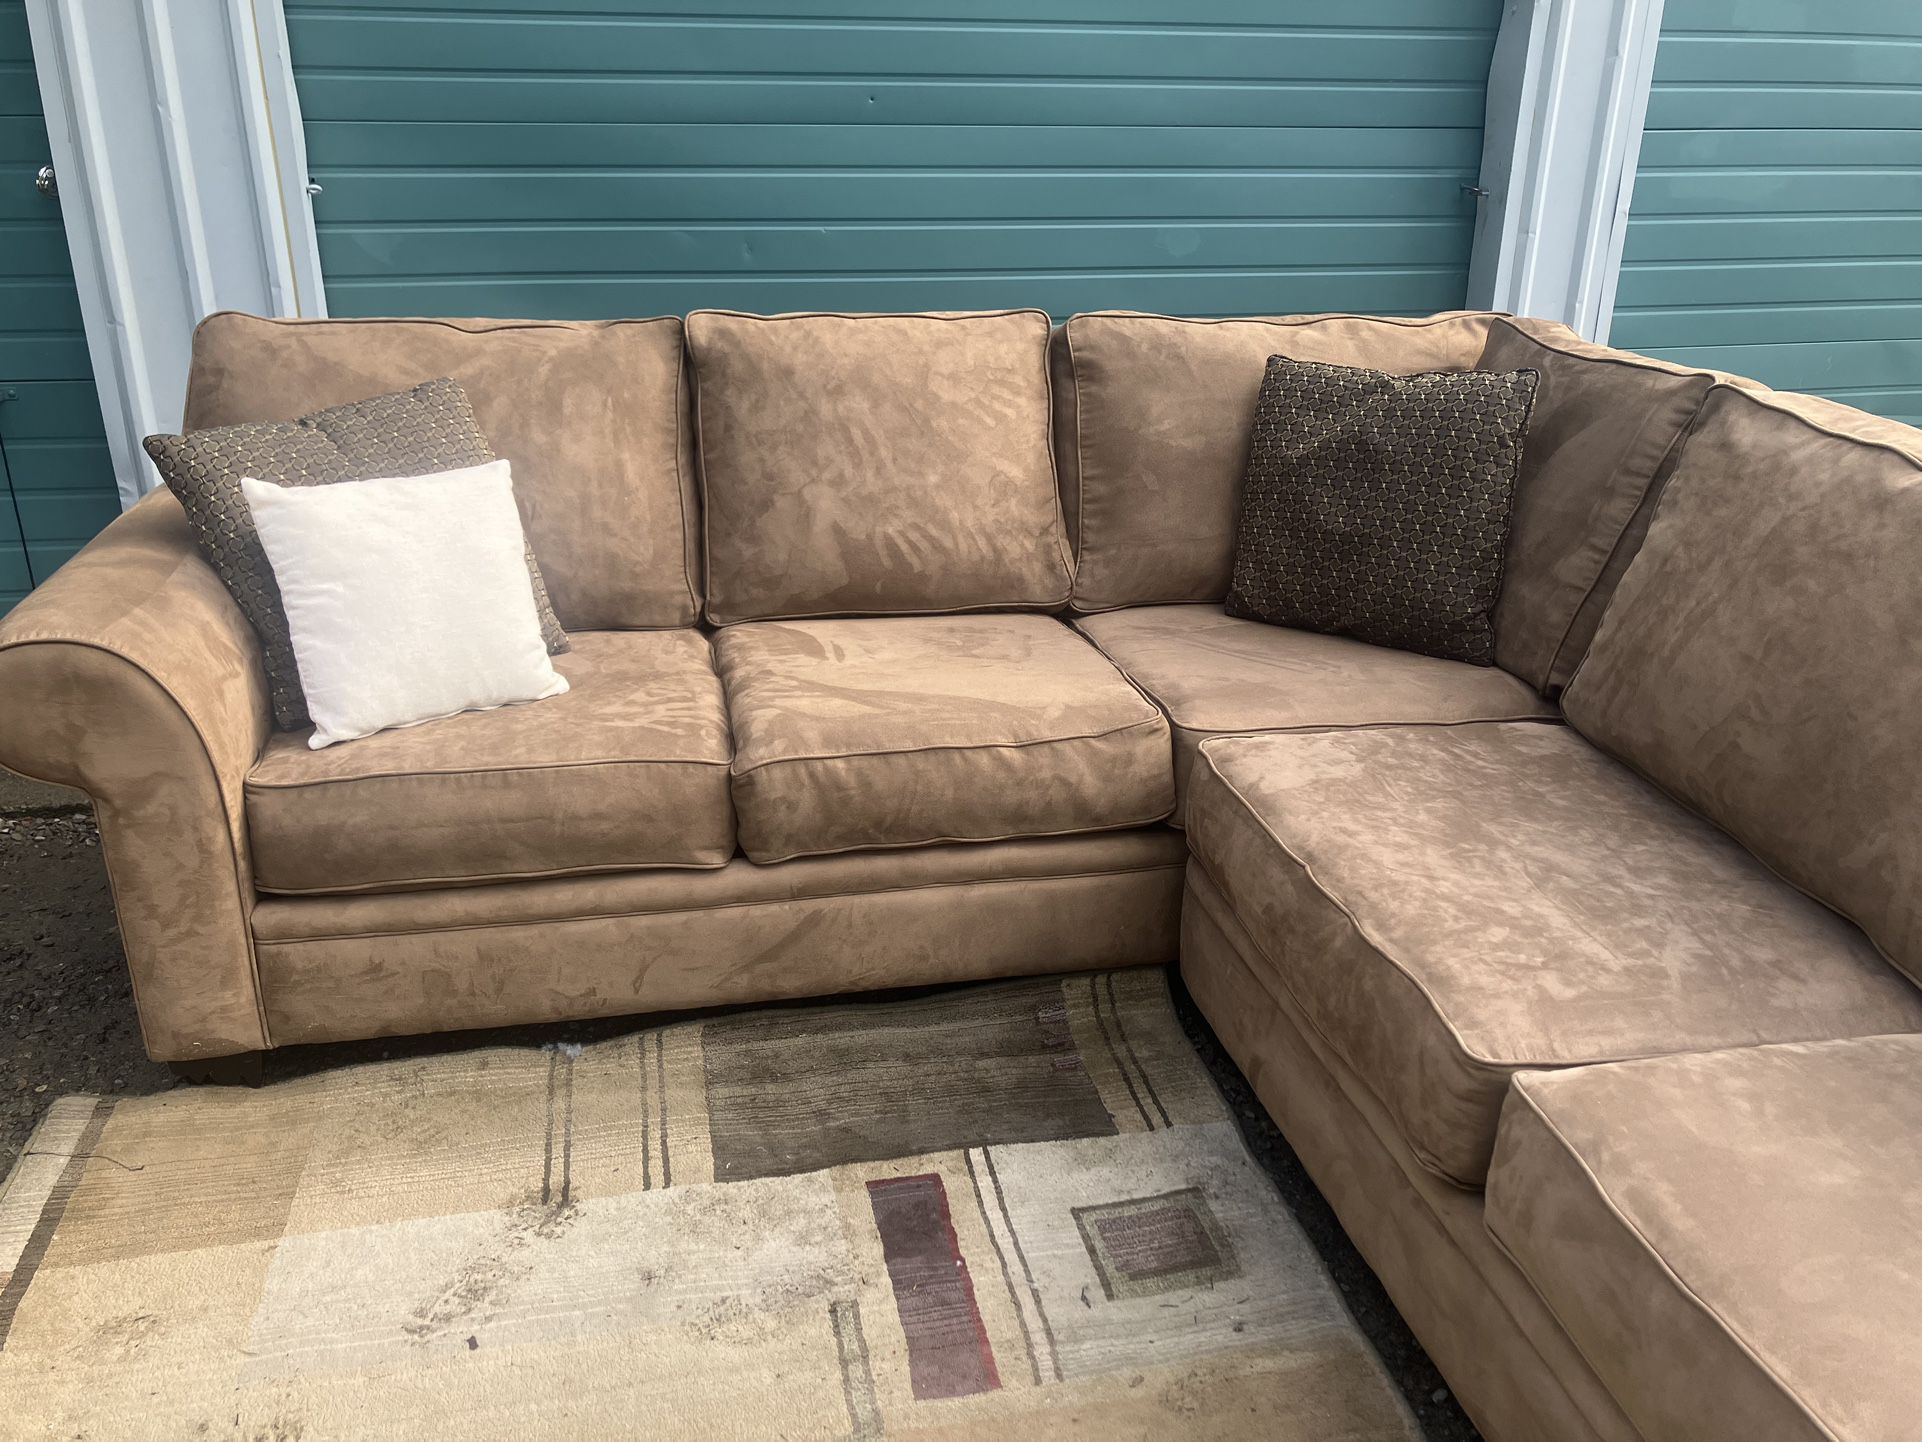 Excellent Sectional For Sale